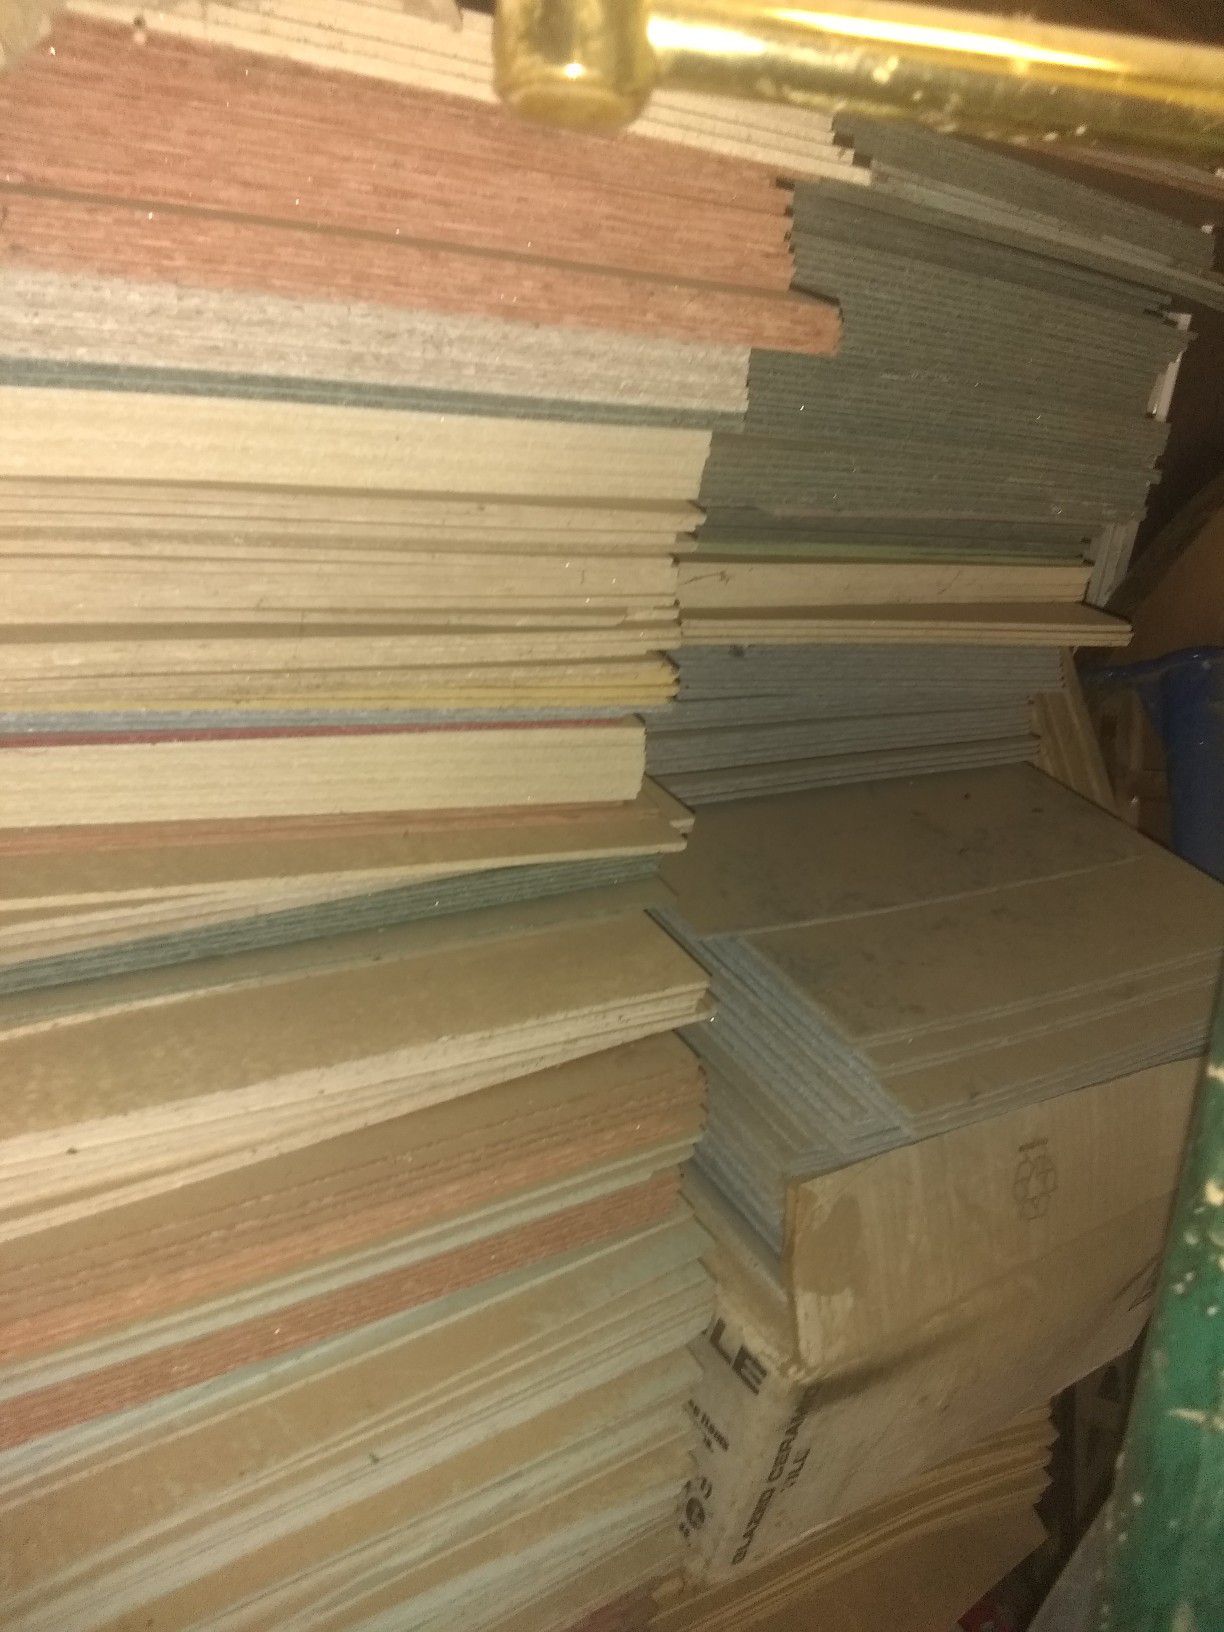 Tile glue down or cement about 300 lbs different colors make offer